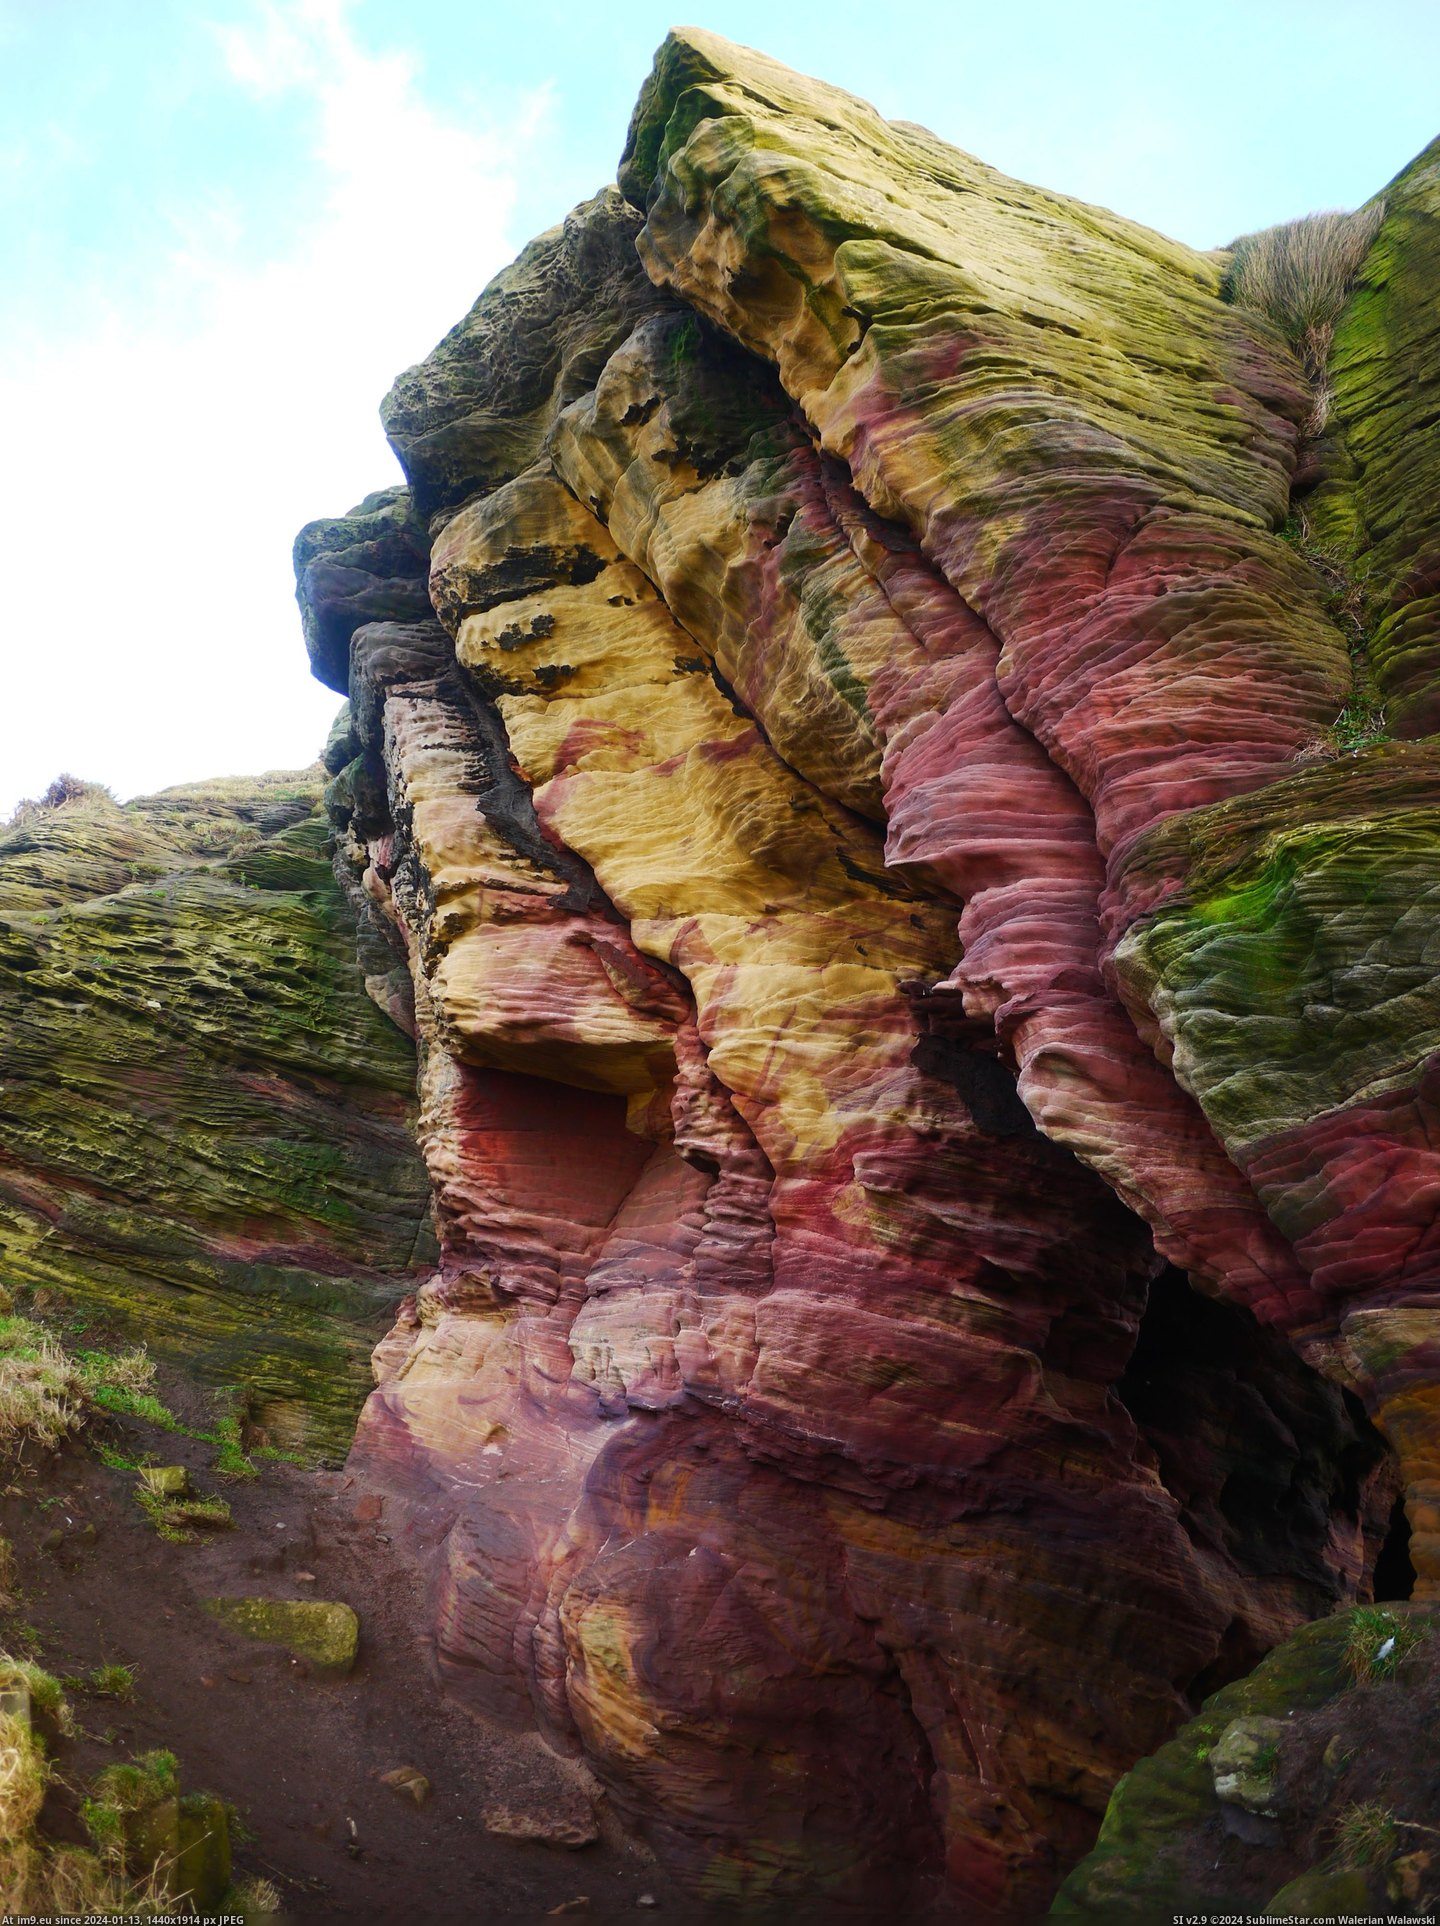 #Rock #Scotland #Anstruther #Colored #Formations [Earthporn] Colored rock formations near Anstruther, Scotland [3,000 x 4,000] [OC] Pic. (Image of album My r/EARTHPORN favs))